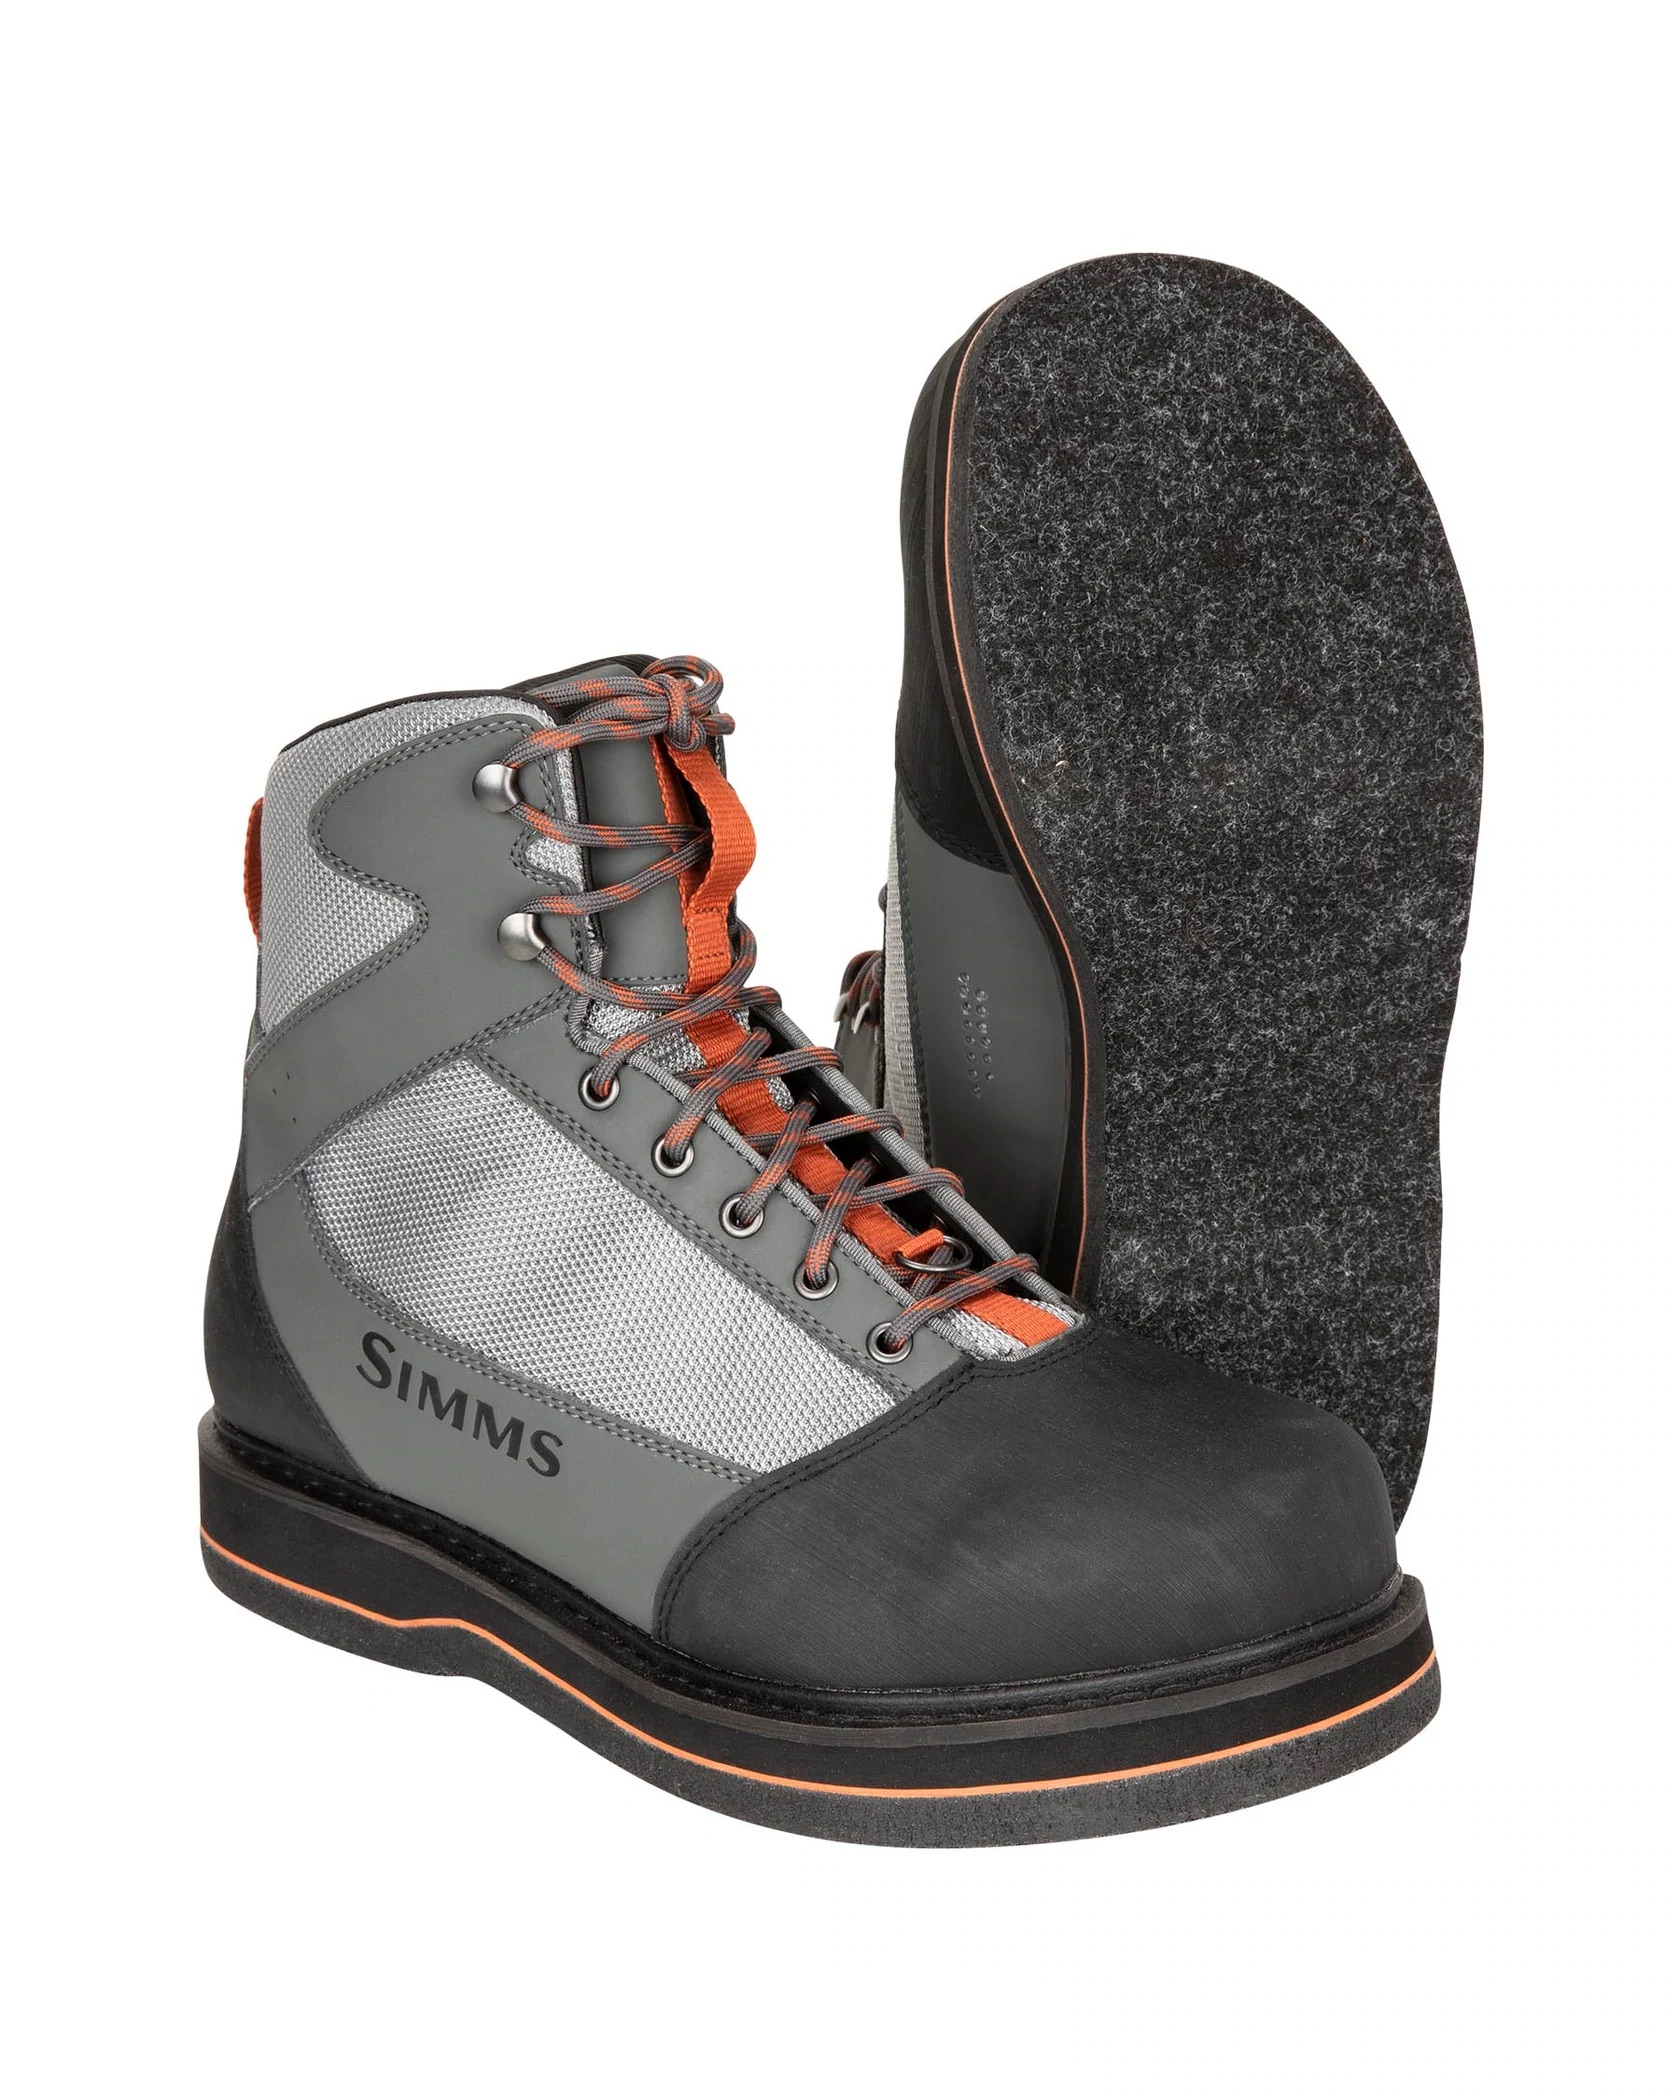 Simms Tributary Boot - Felt - Size 8